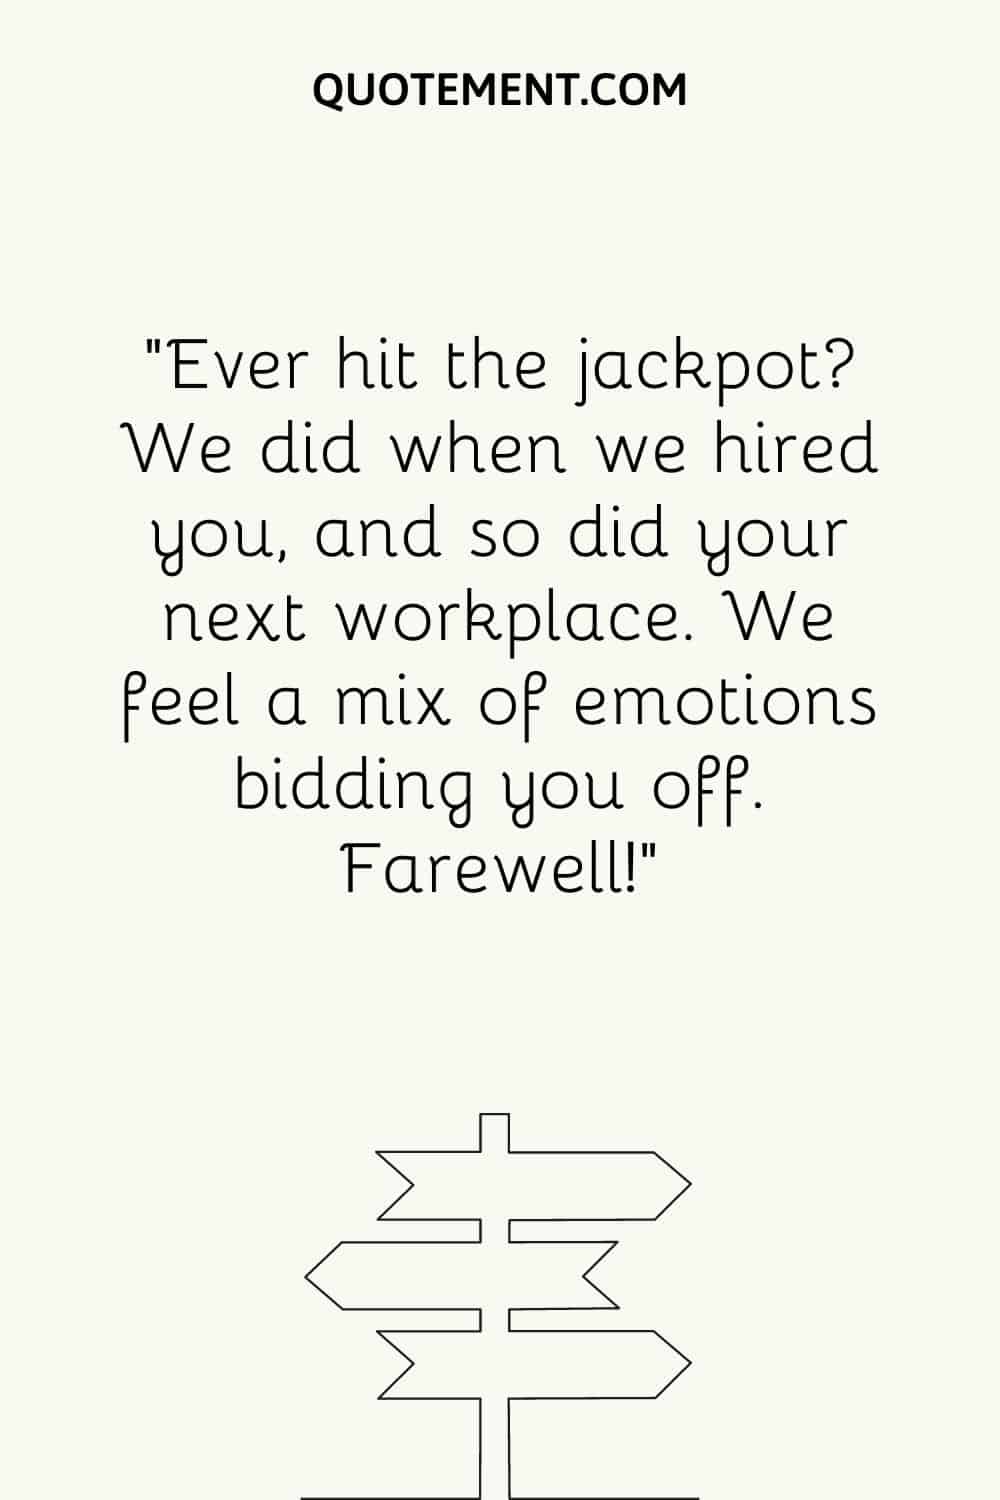 “Ever hit the jackpot We did when we hired you, and so did your next workplace. We feel a mix of emotions bidding you off. Farewell!”